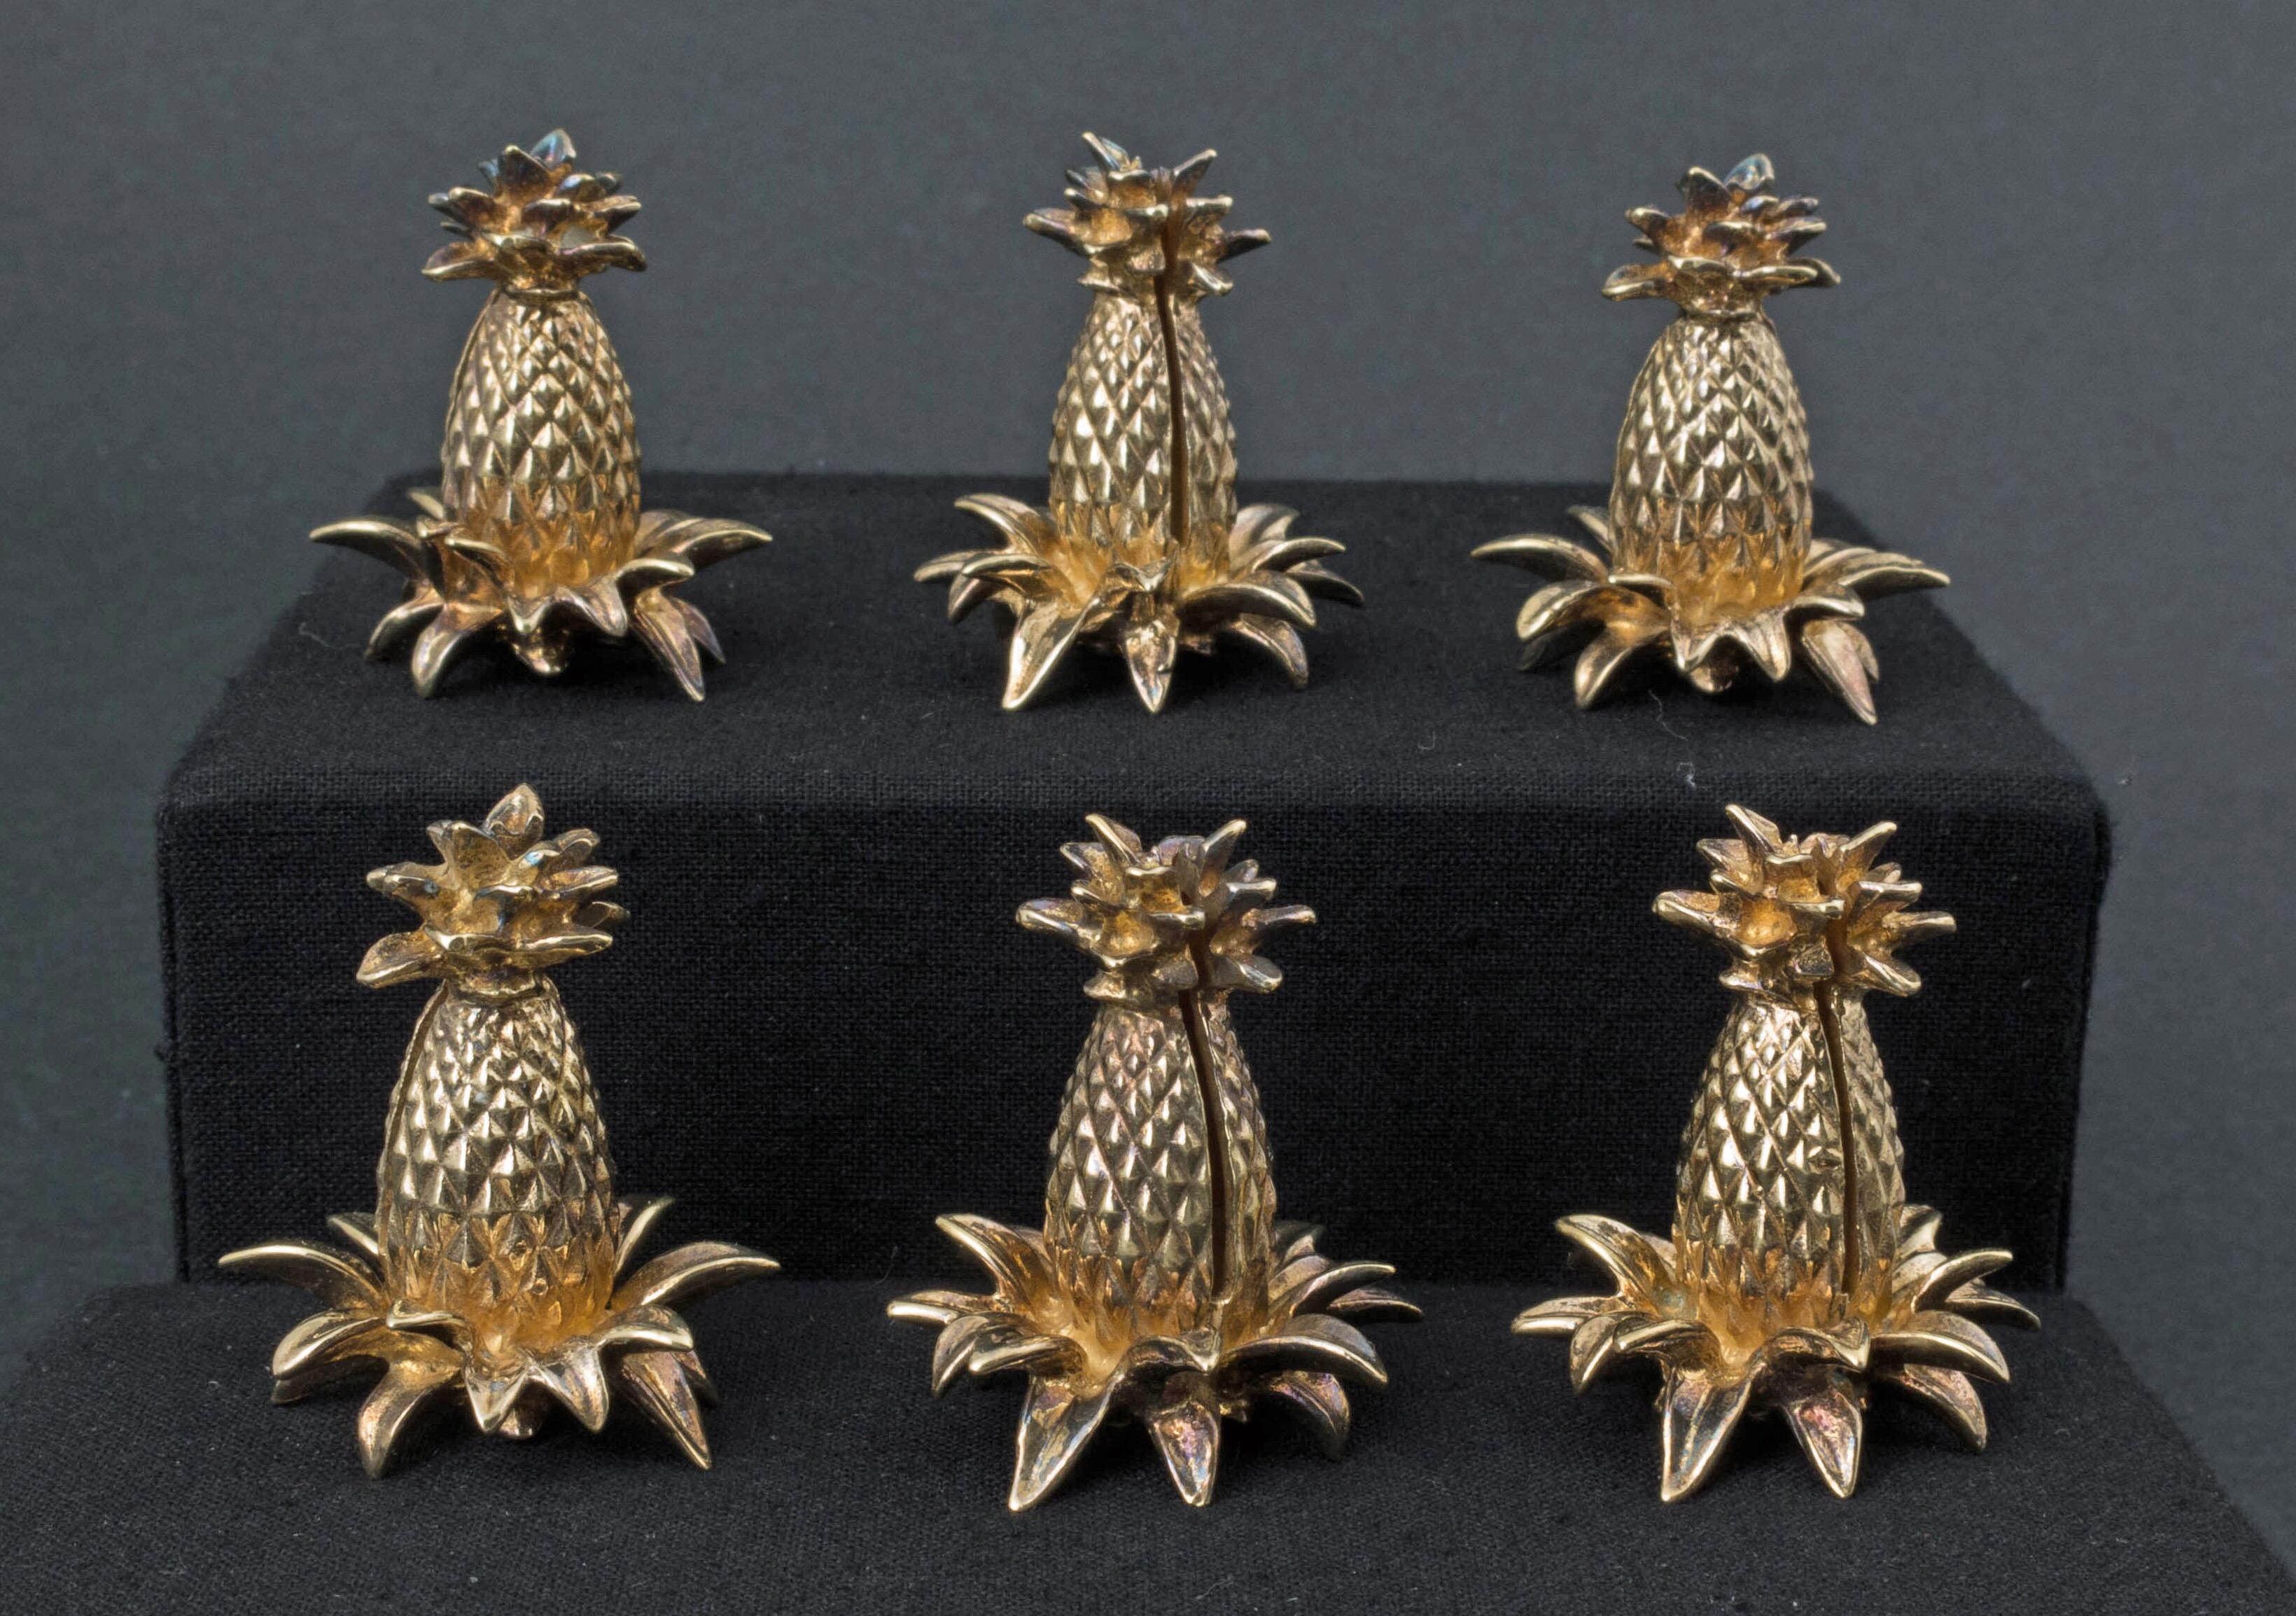 A wonderful set of six gilt silver pineapple form place card holders by Tiffany & Co., circa 1940s.

Crafted from gilt sterling silver, the charming placeholders are in the form of pineapples, complete with a spray of leaves to the base, and a